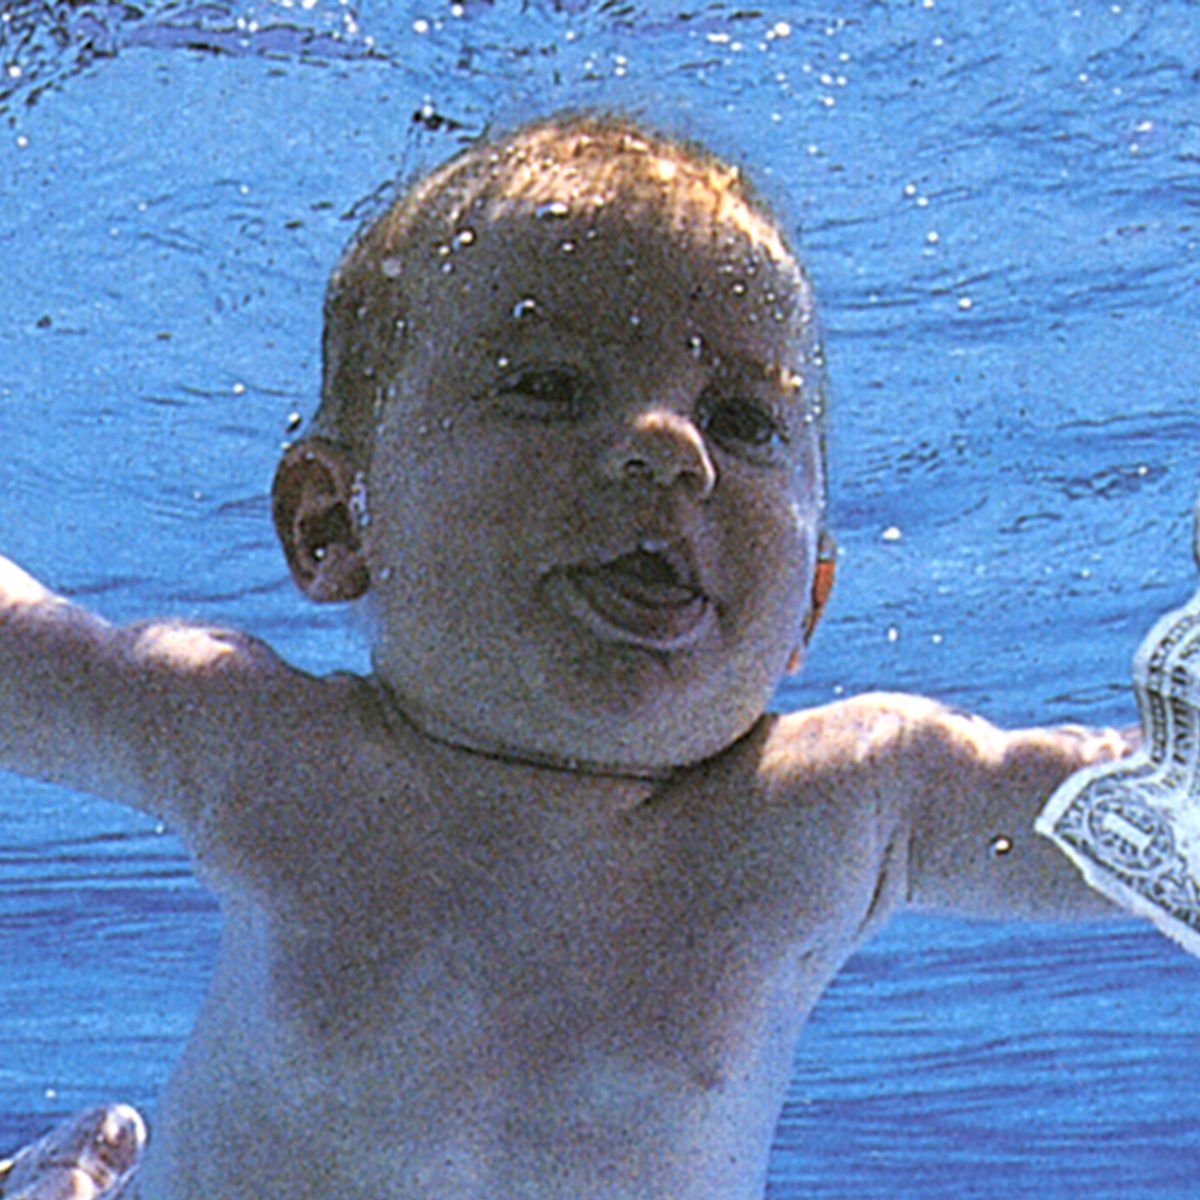 Nirvana: Court revives case over naked baby Nevermind album cover ...